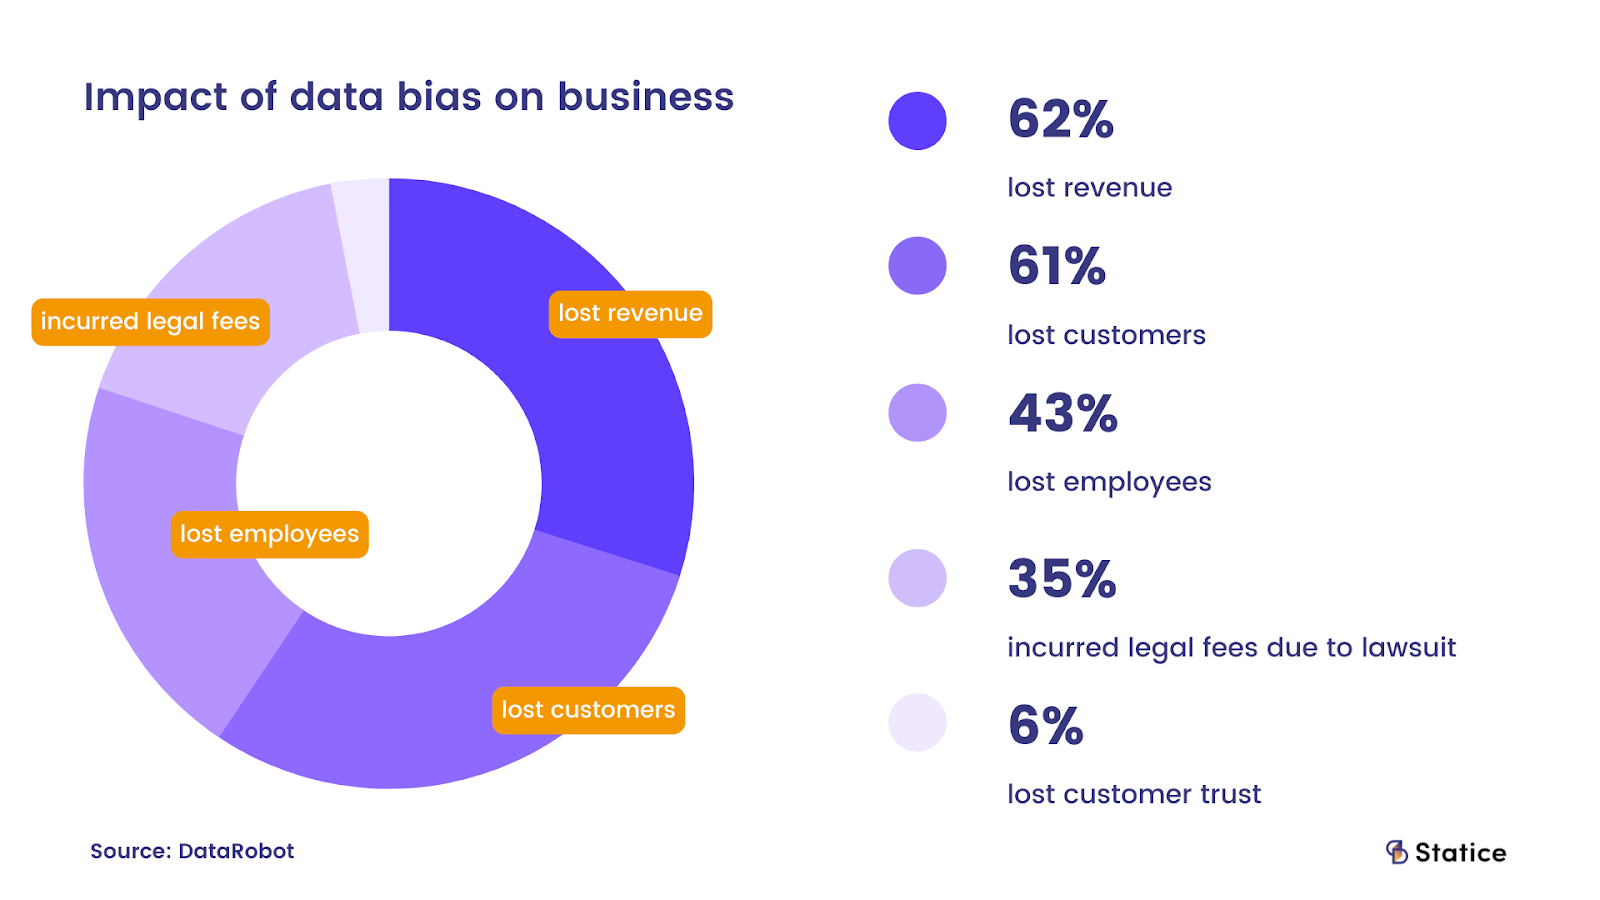 A graph showing the impact of data bias on businesses showing 62% lost revenue and customers